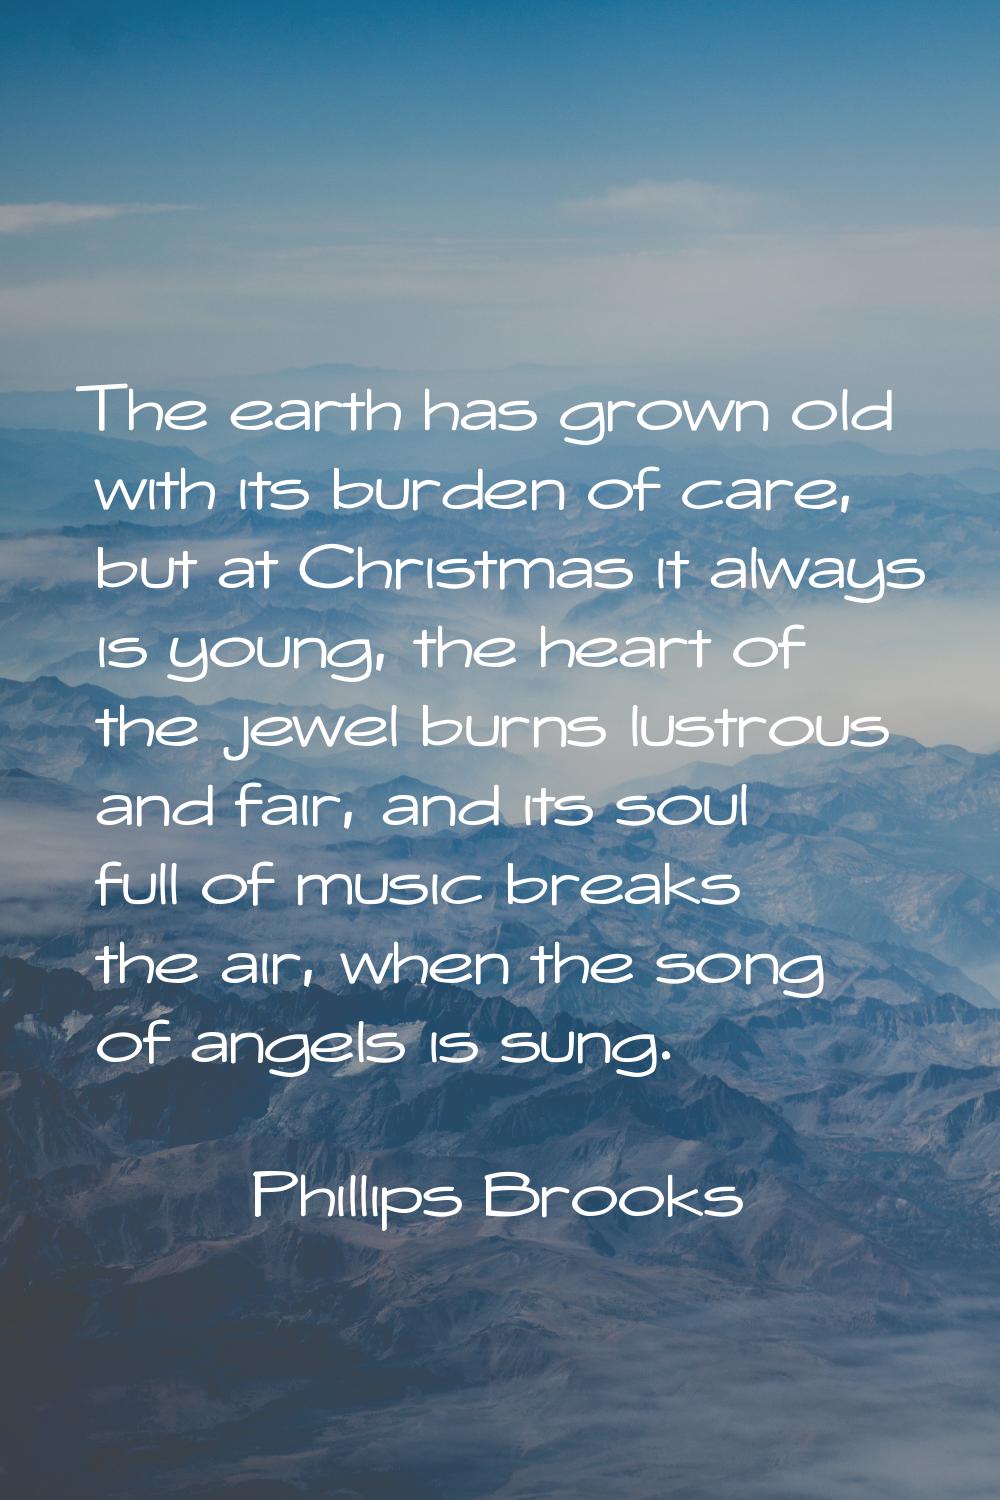 The earth has grown old with its burden of care, but at Christmas it always is young, the heart of 